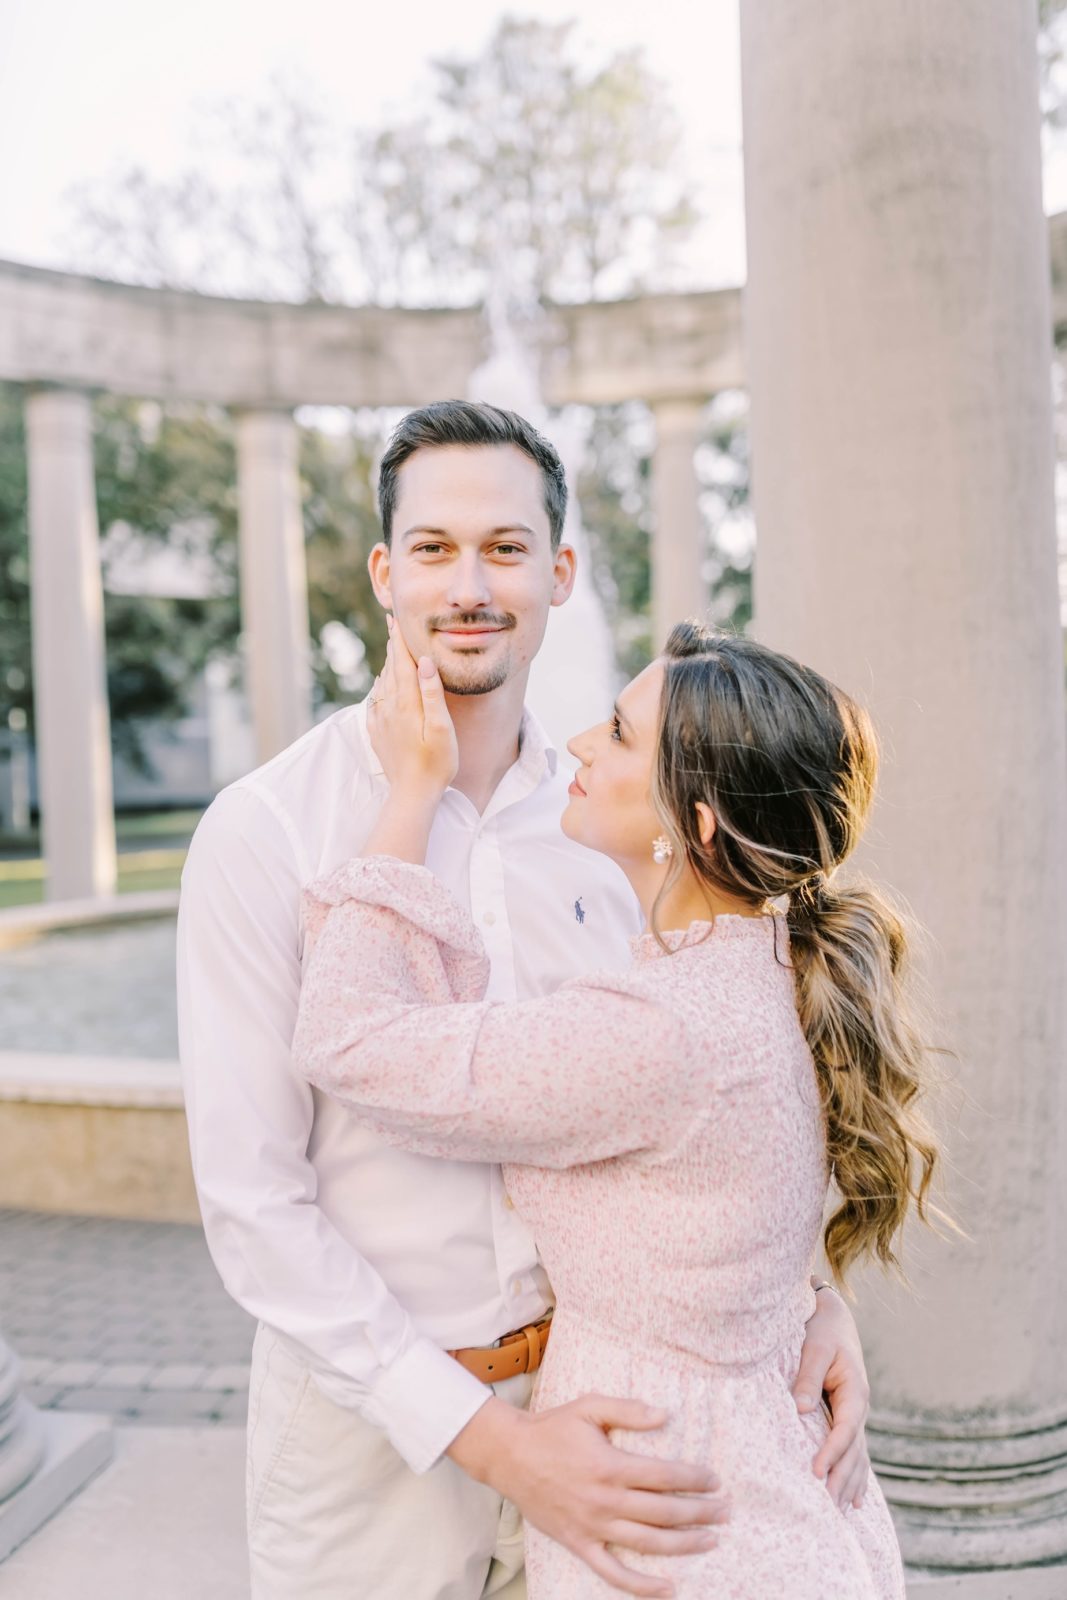 A man looks ahead as a woman holds his cheek tenderly by Christina Elliott Photography. Rice University photography location #christinaelliottphotography #Houstonengagements #riceuniversity #springengagements #sayIdo #Houstonengagementphotographer